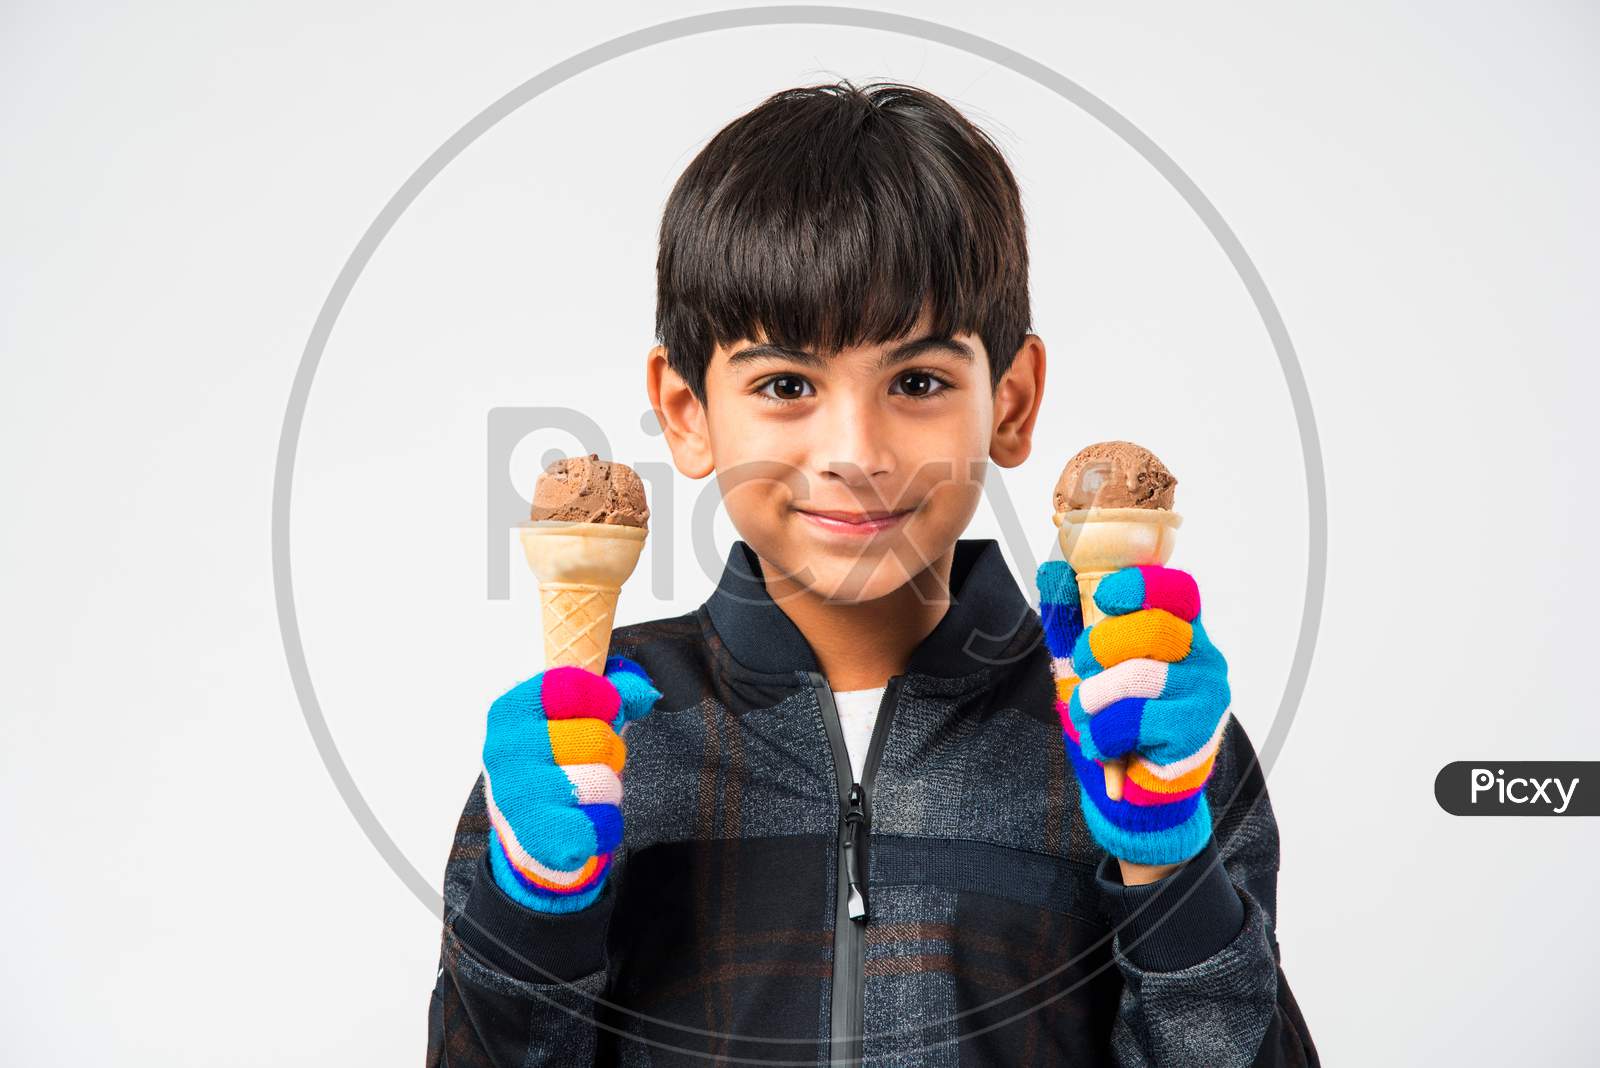 Indian kid / boy eating ice cream in warm clothes on white background